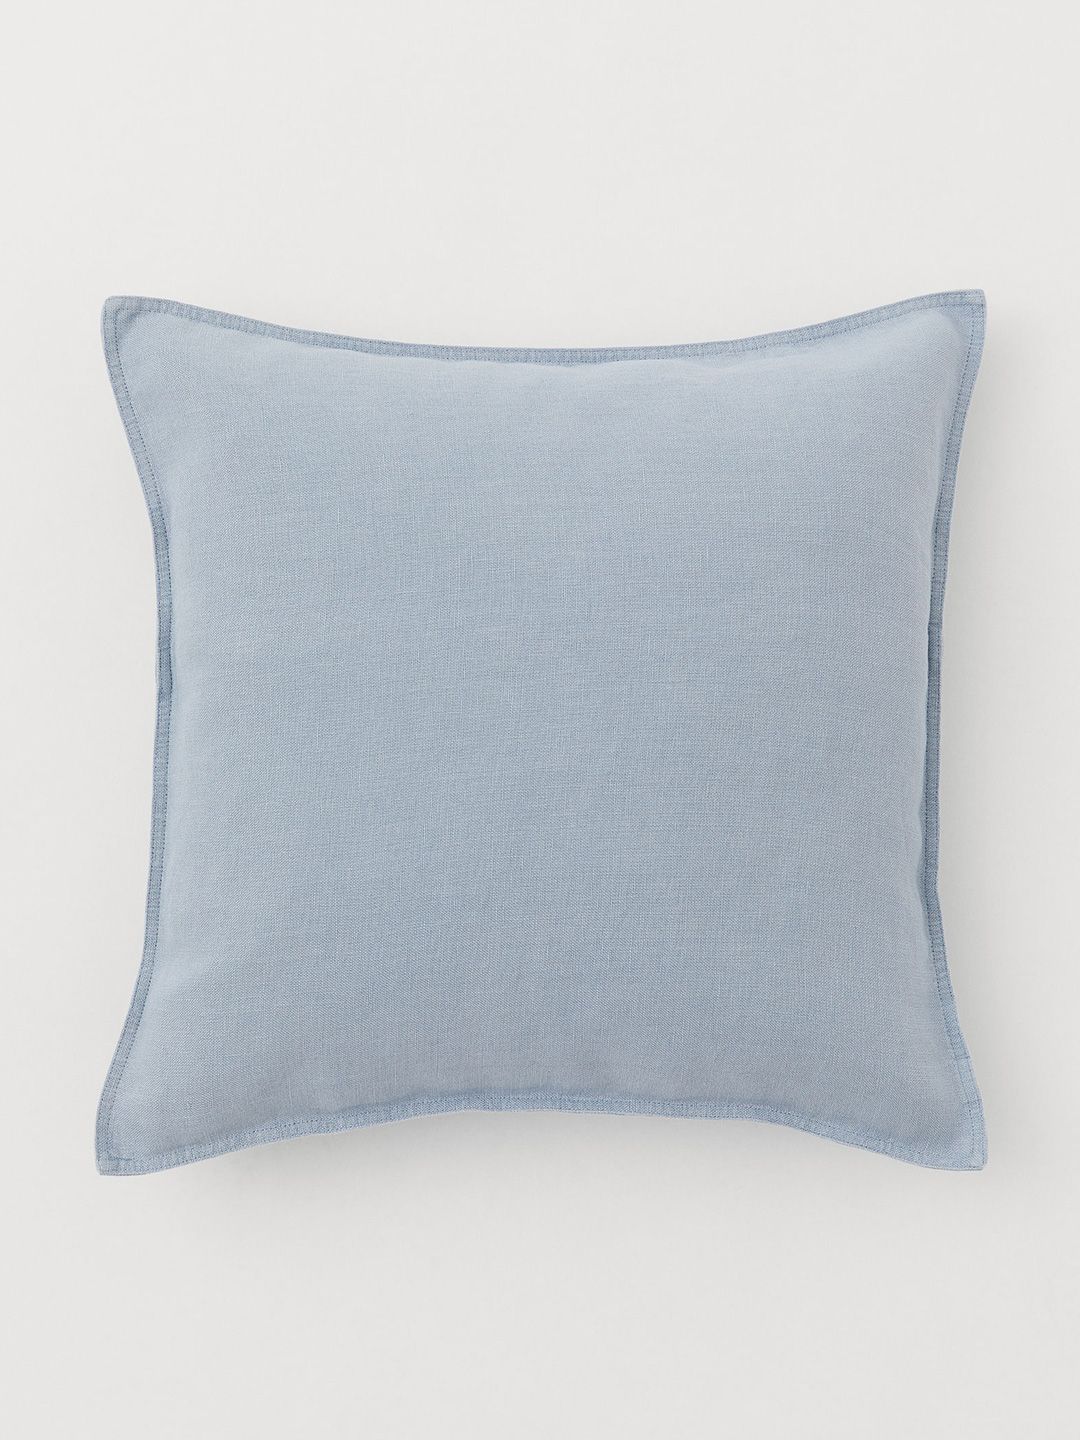 H&M Blue Washed Linen Cushion Cover Price in India